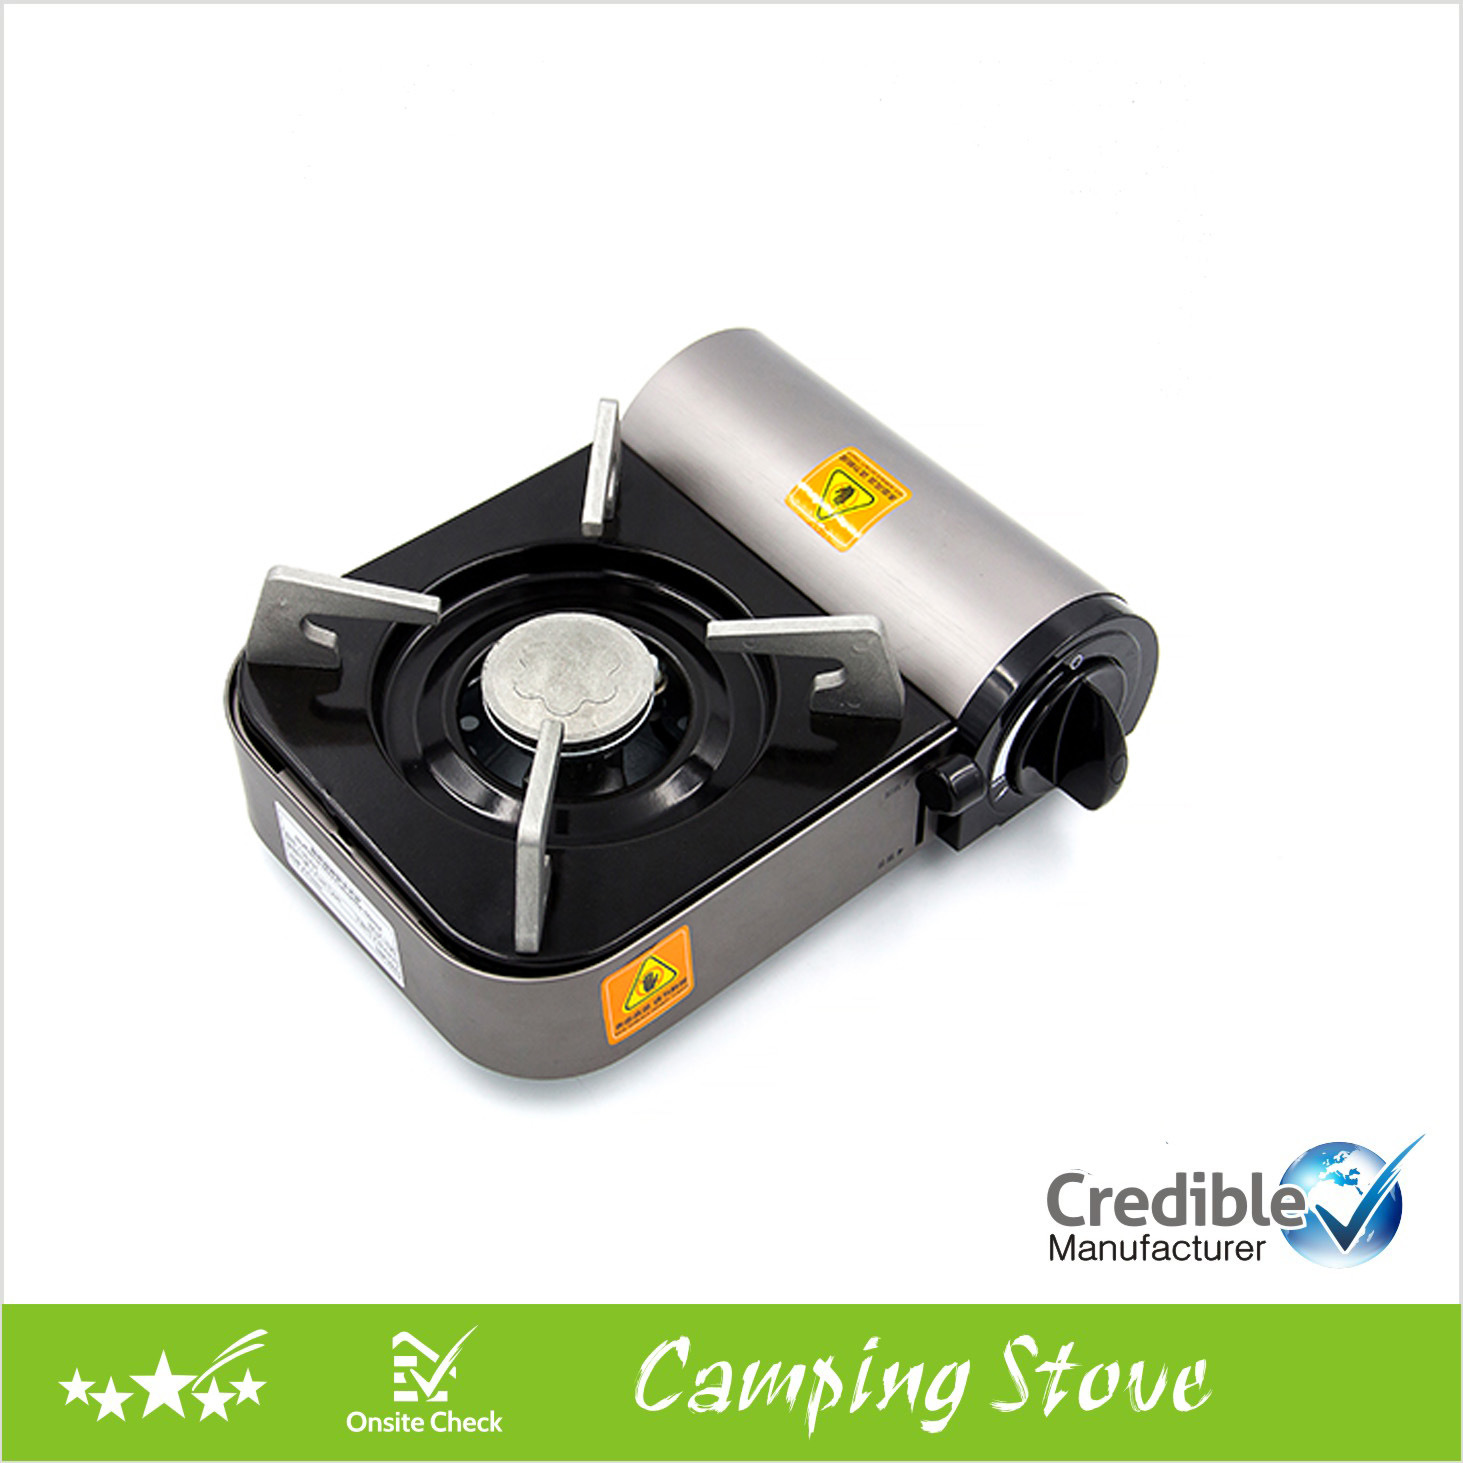 Portable Single Burner Gas Stove Made in China